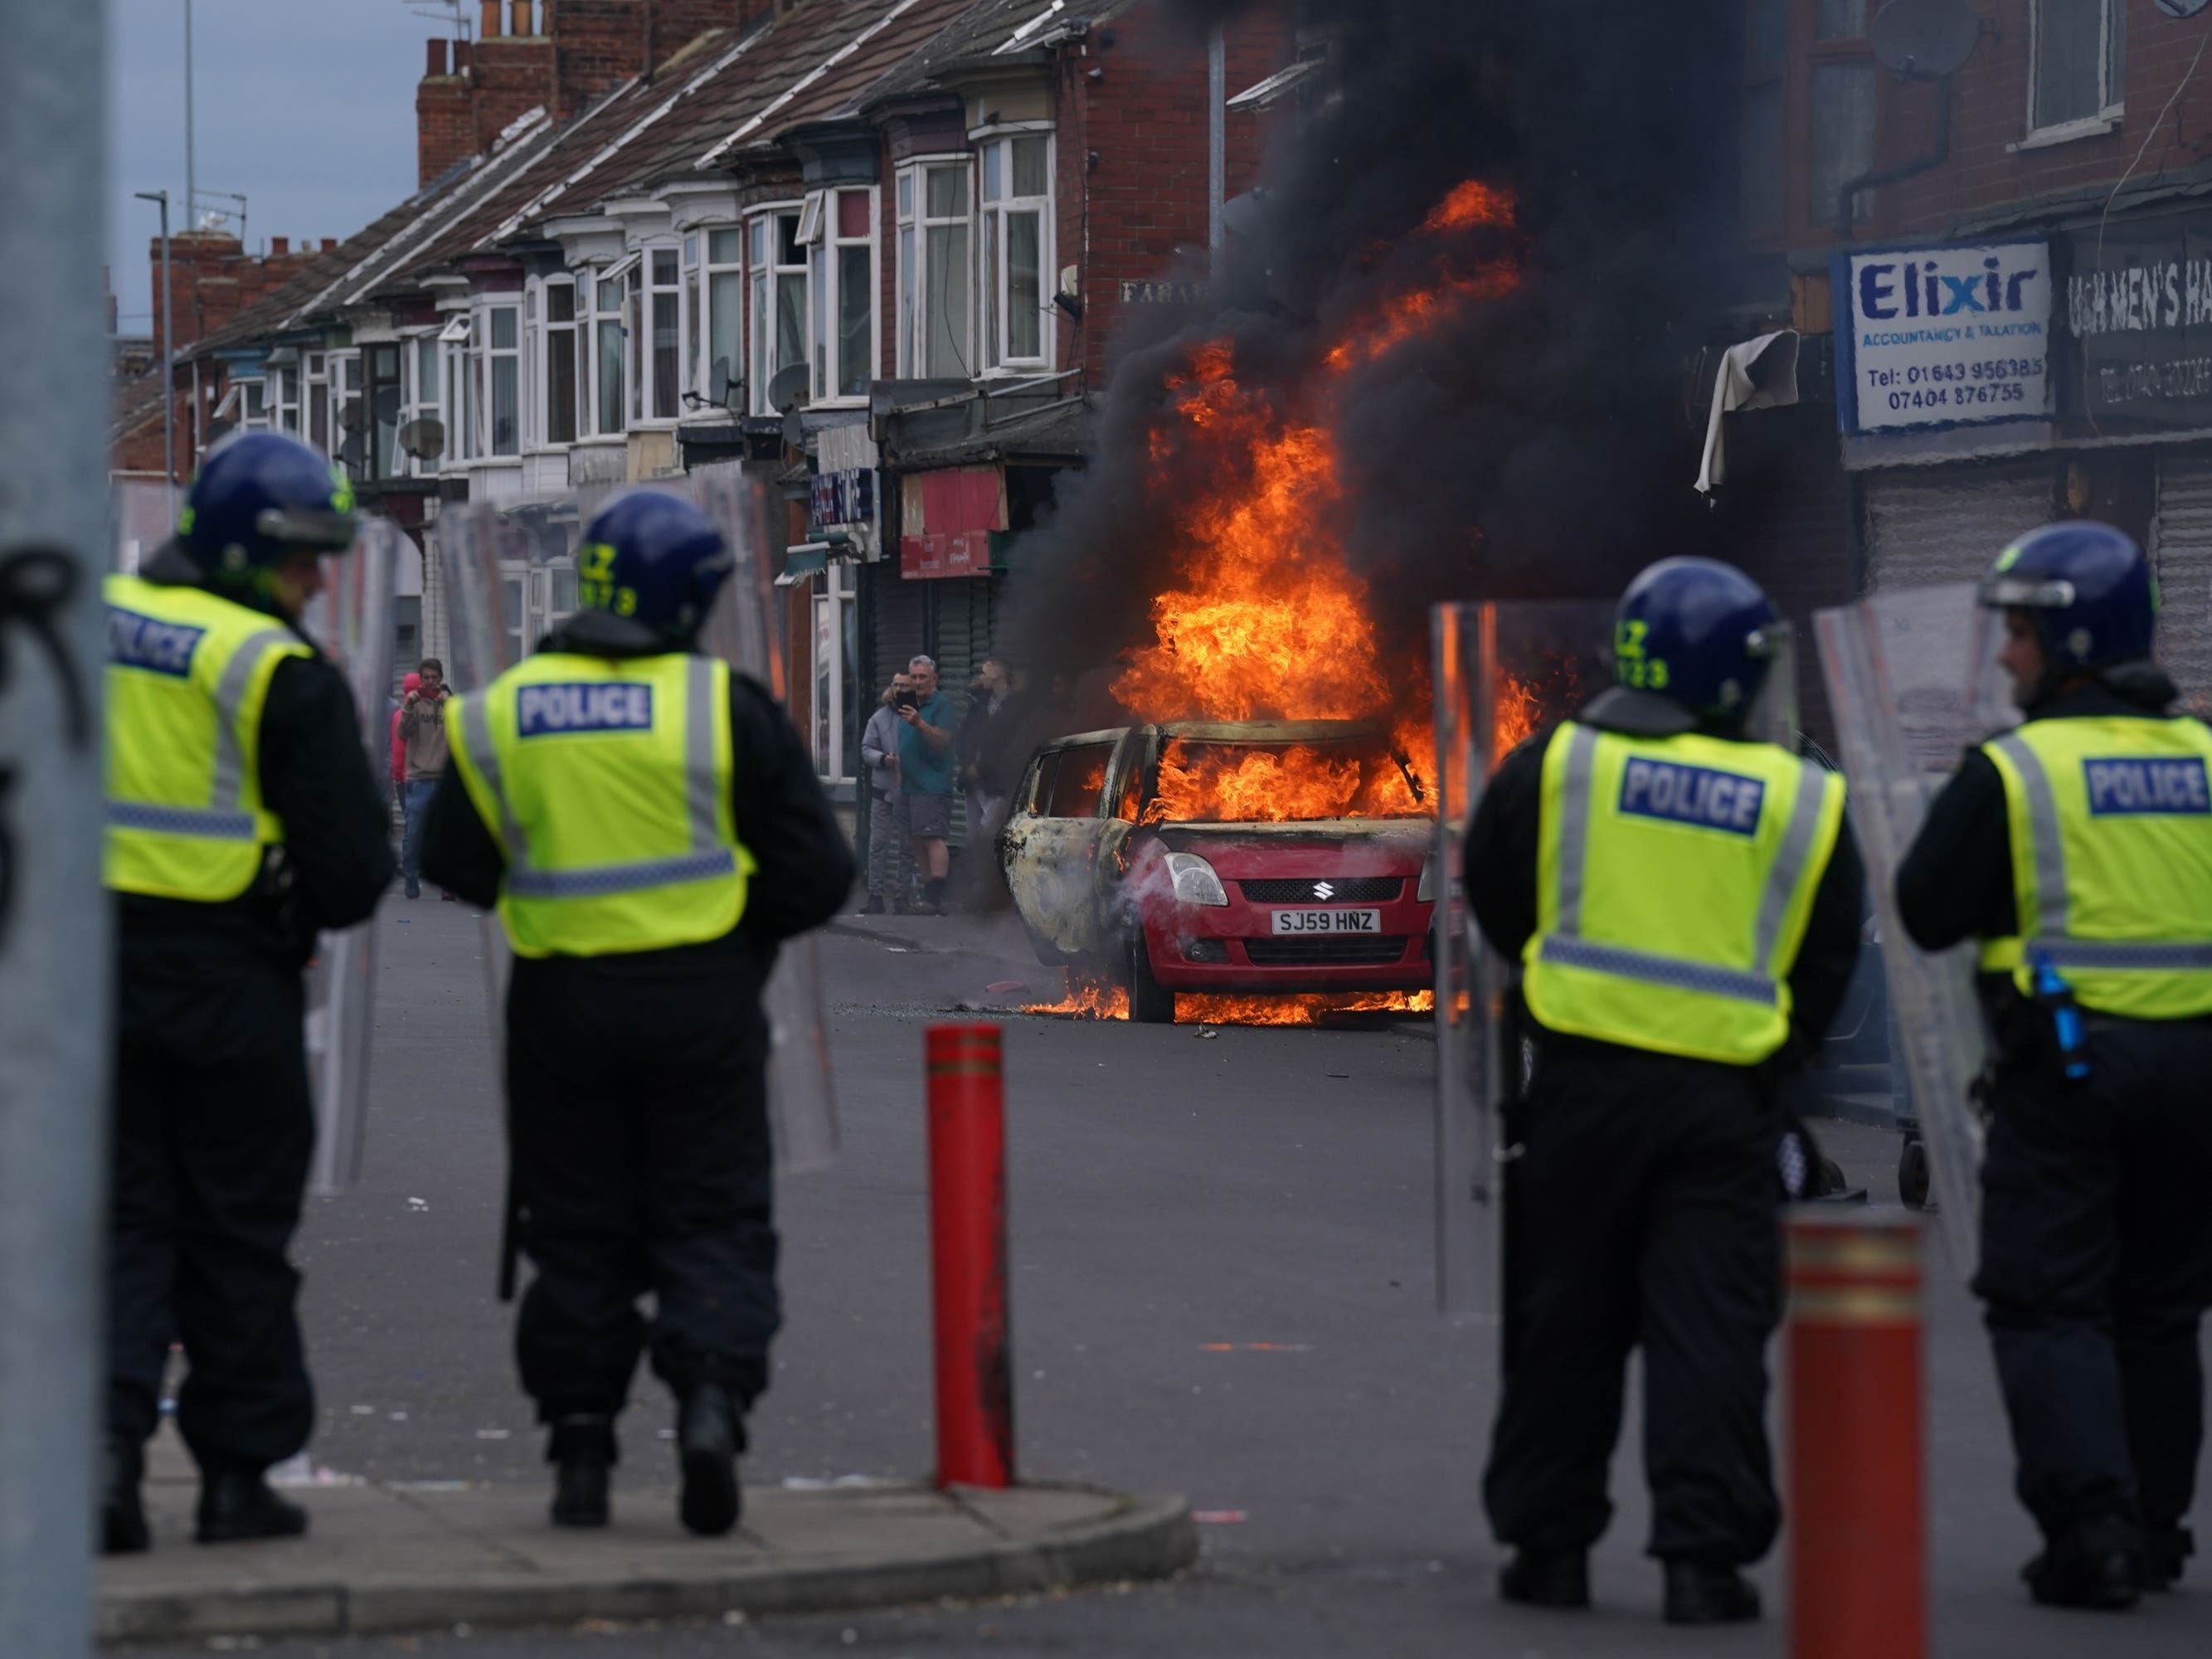 Name and shame rioters, Prime Minister says amid bid to crack down on disorder